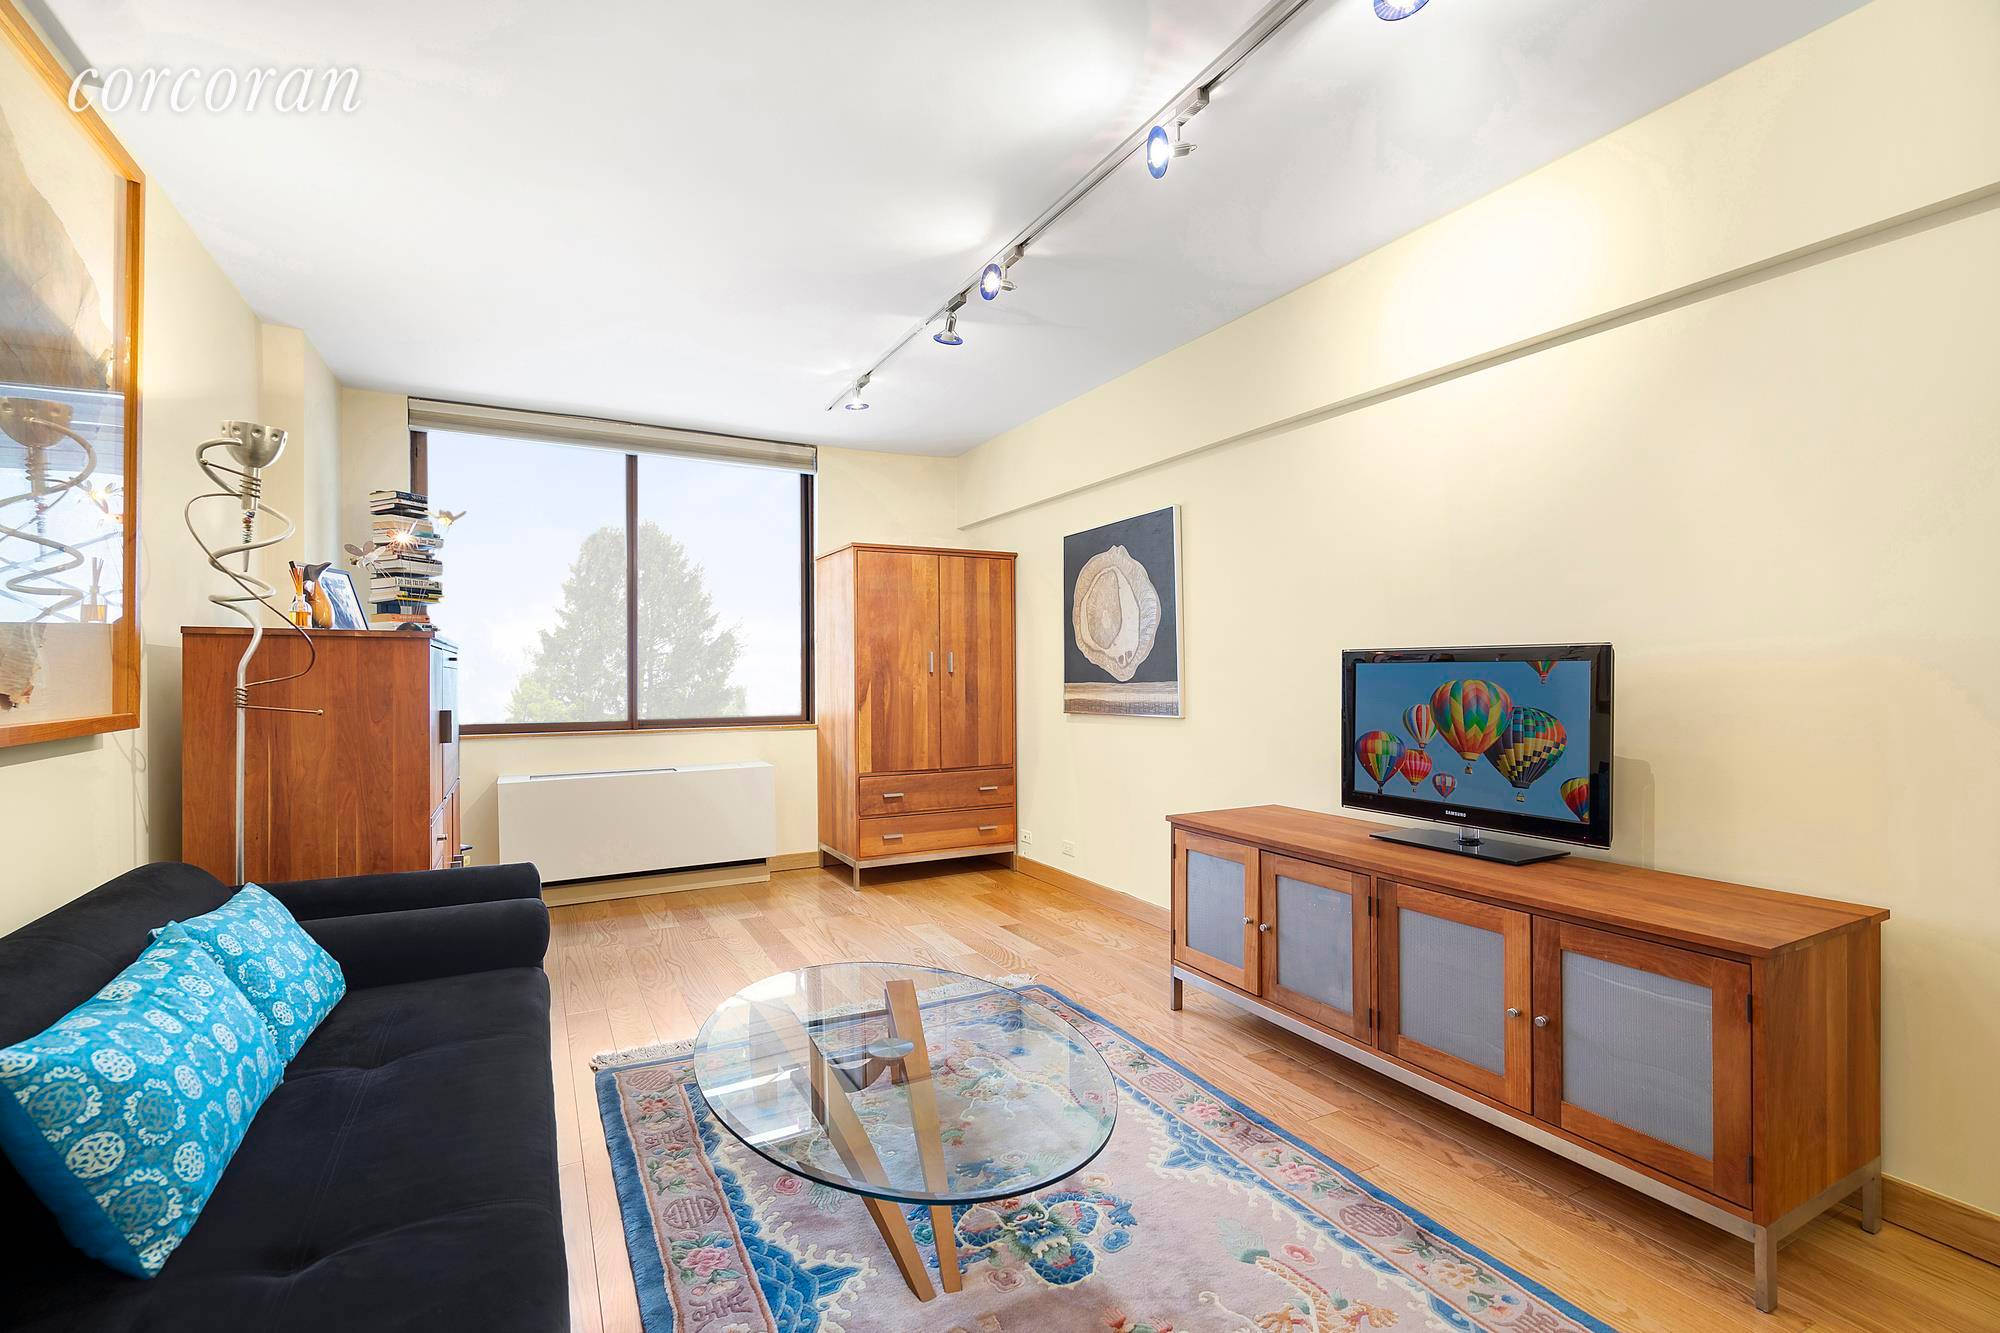 Residence 2 ZZ is a turn key, gut renovated 576 sq ft bright one bedroom with Northern exposures.